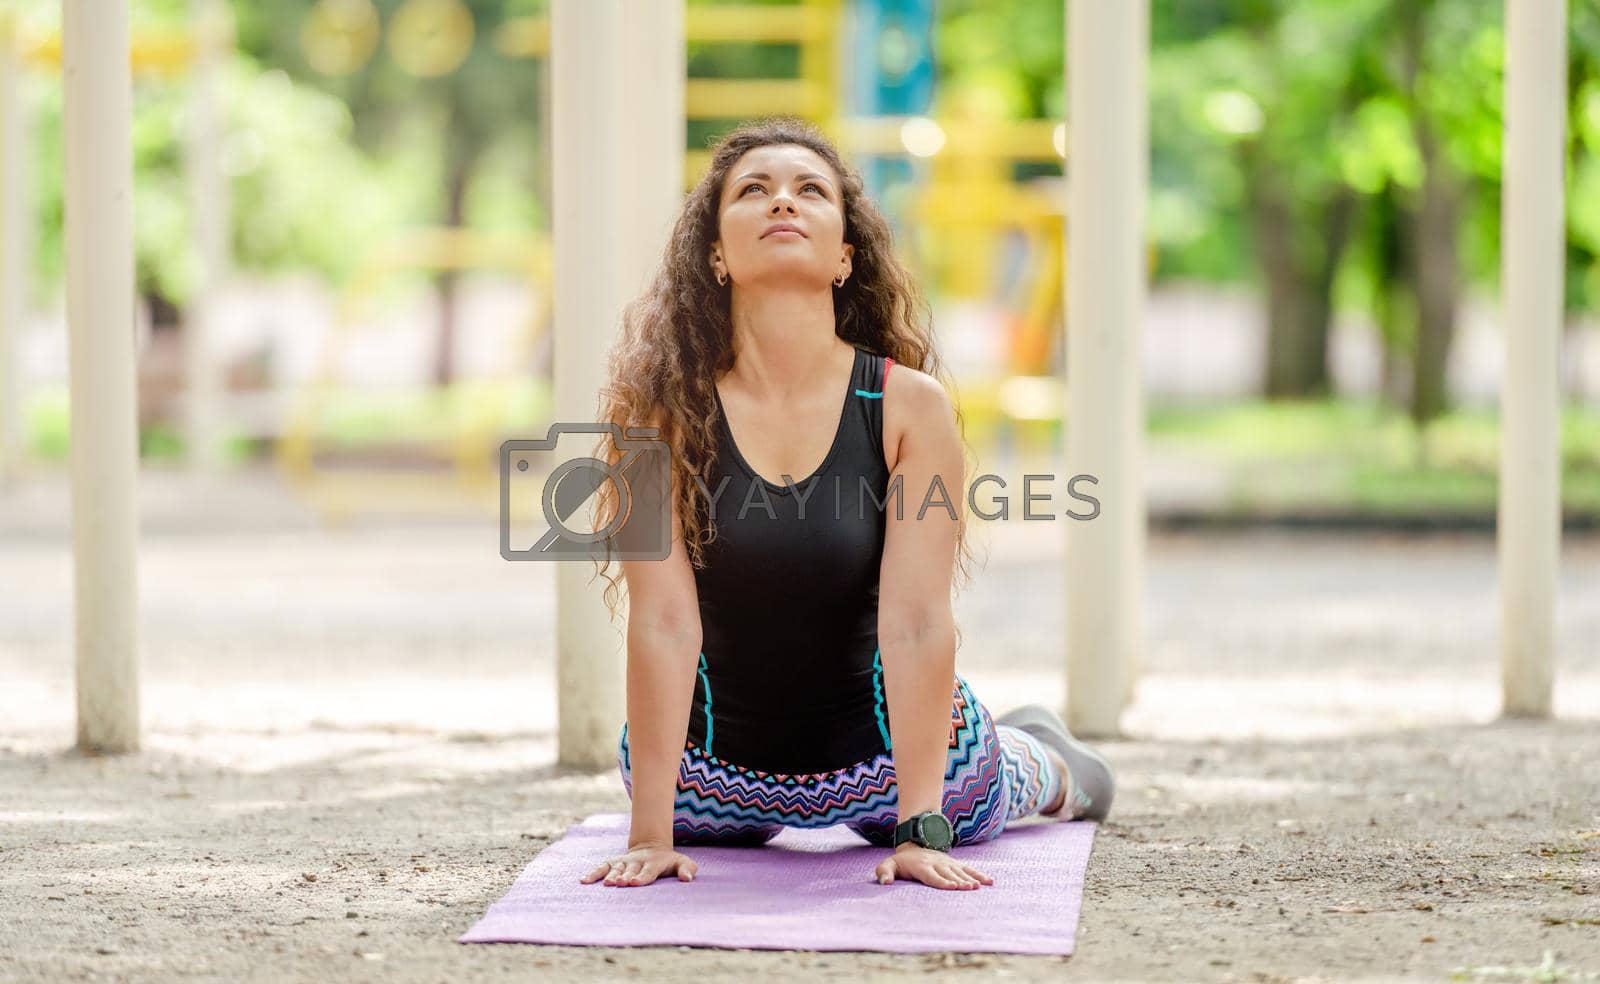 Pretty girl doing yoga upward facing dog pose during workout outdoors. Young woman stretching at stadium